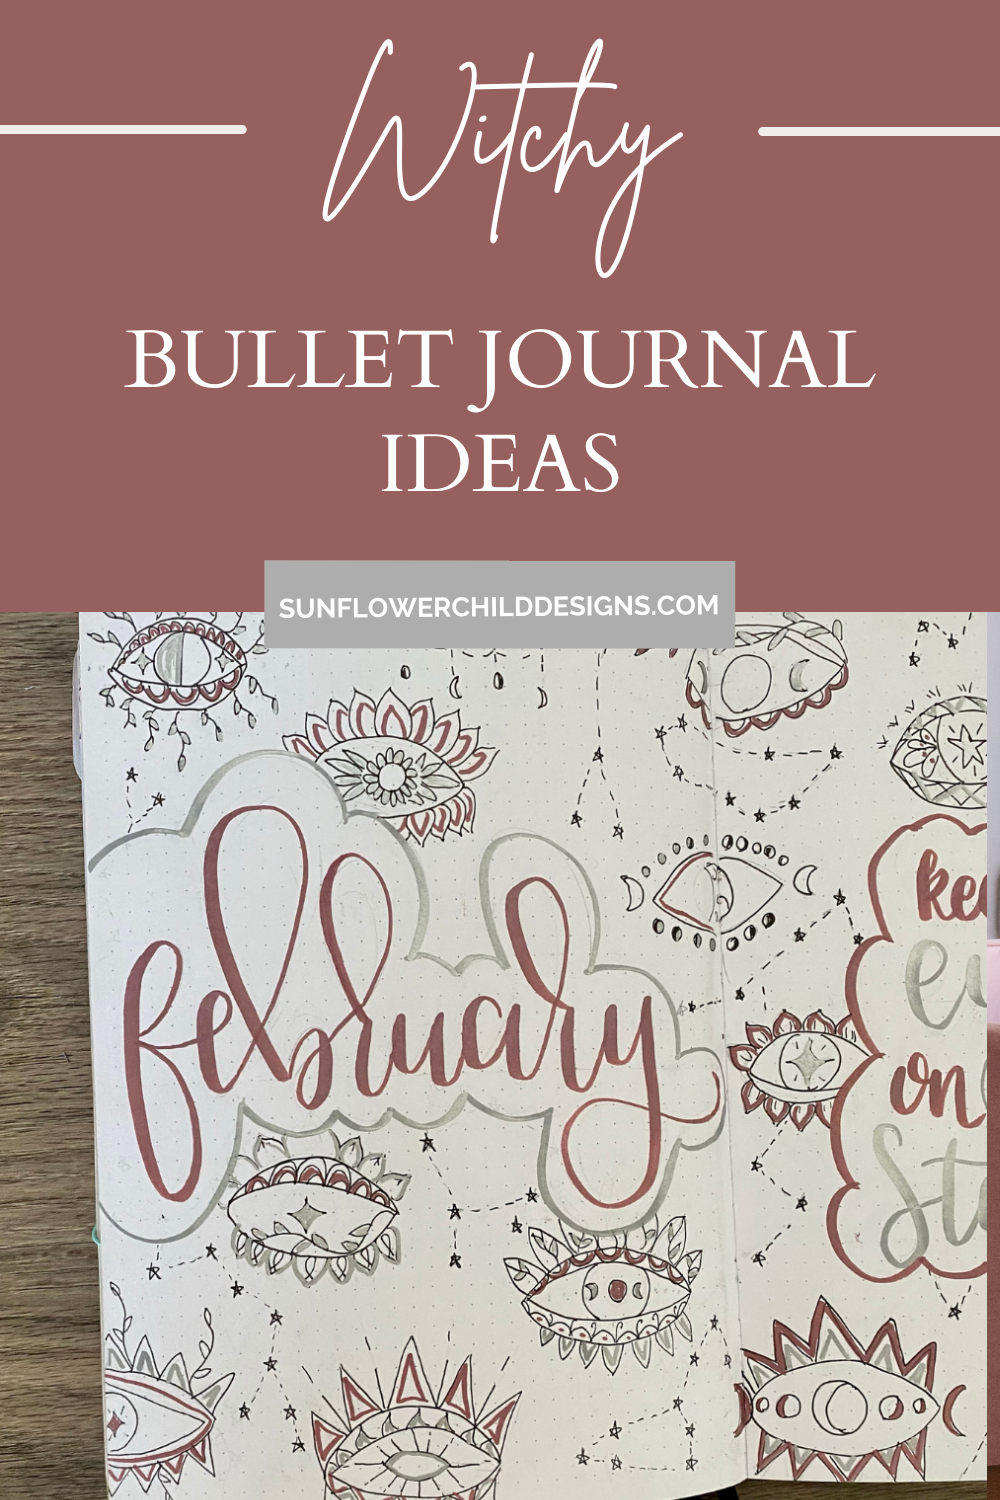 witchy-bullet-journal-ideas-february-bullet-journal-ideas 1.png